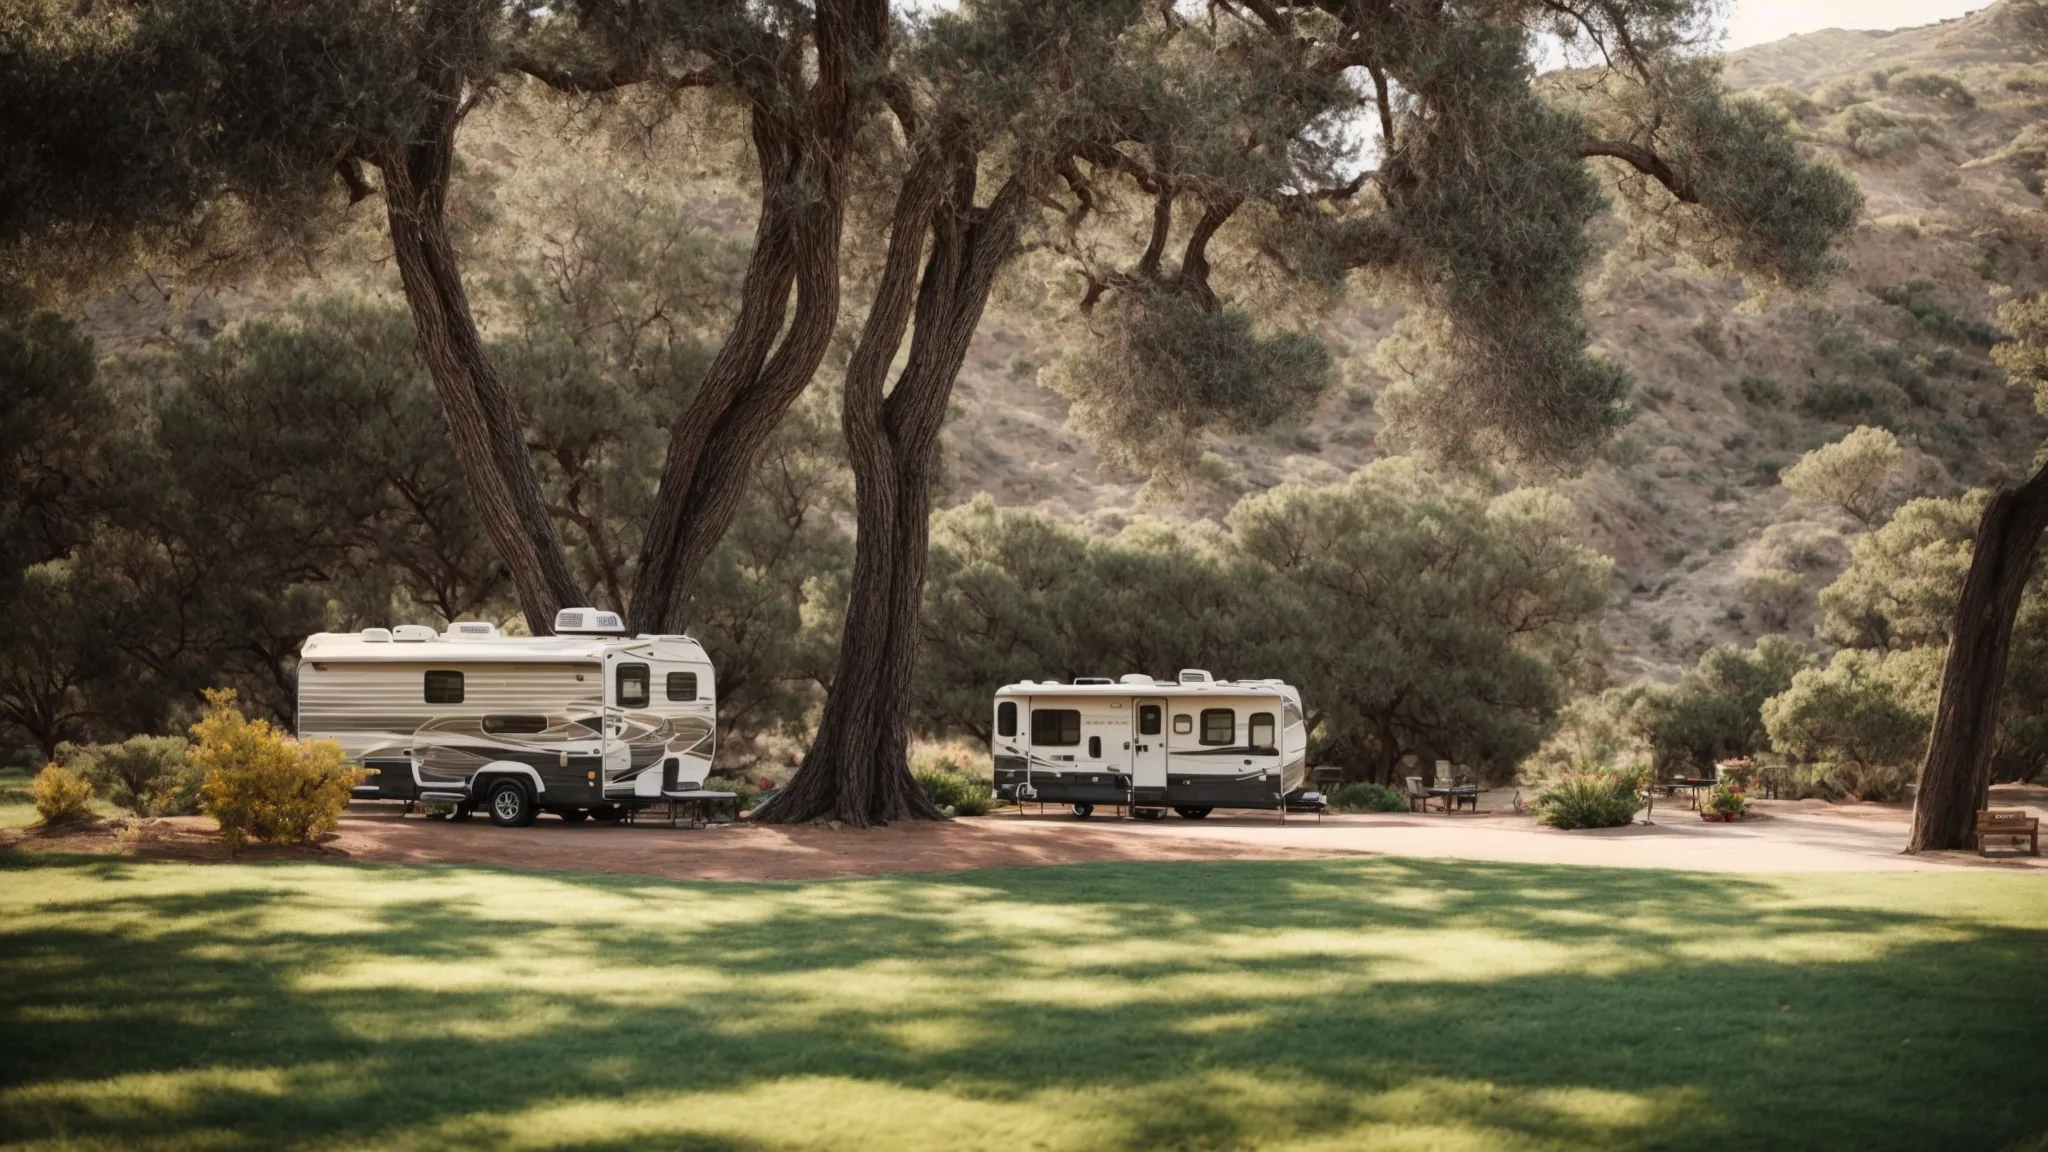 an idyllic san diego park scene with a recreational vehicle parked amidst nature, signifying affordable adventure.